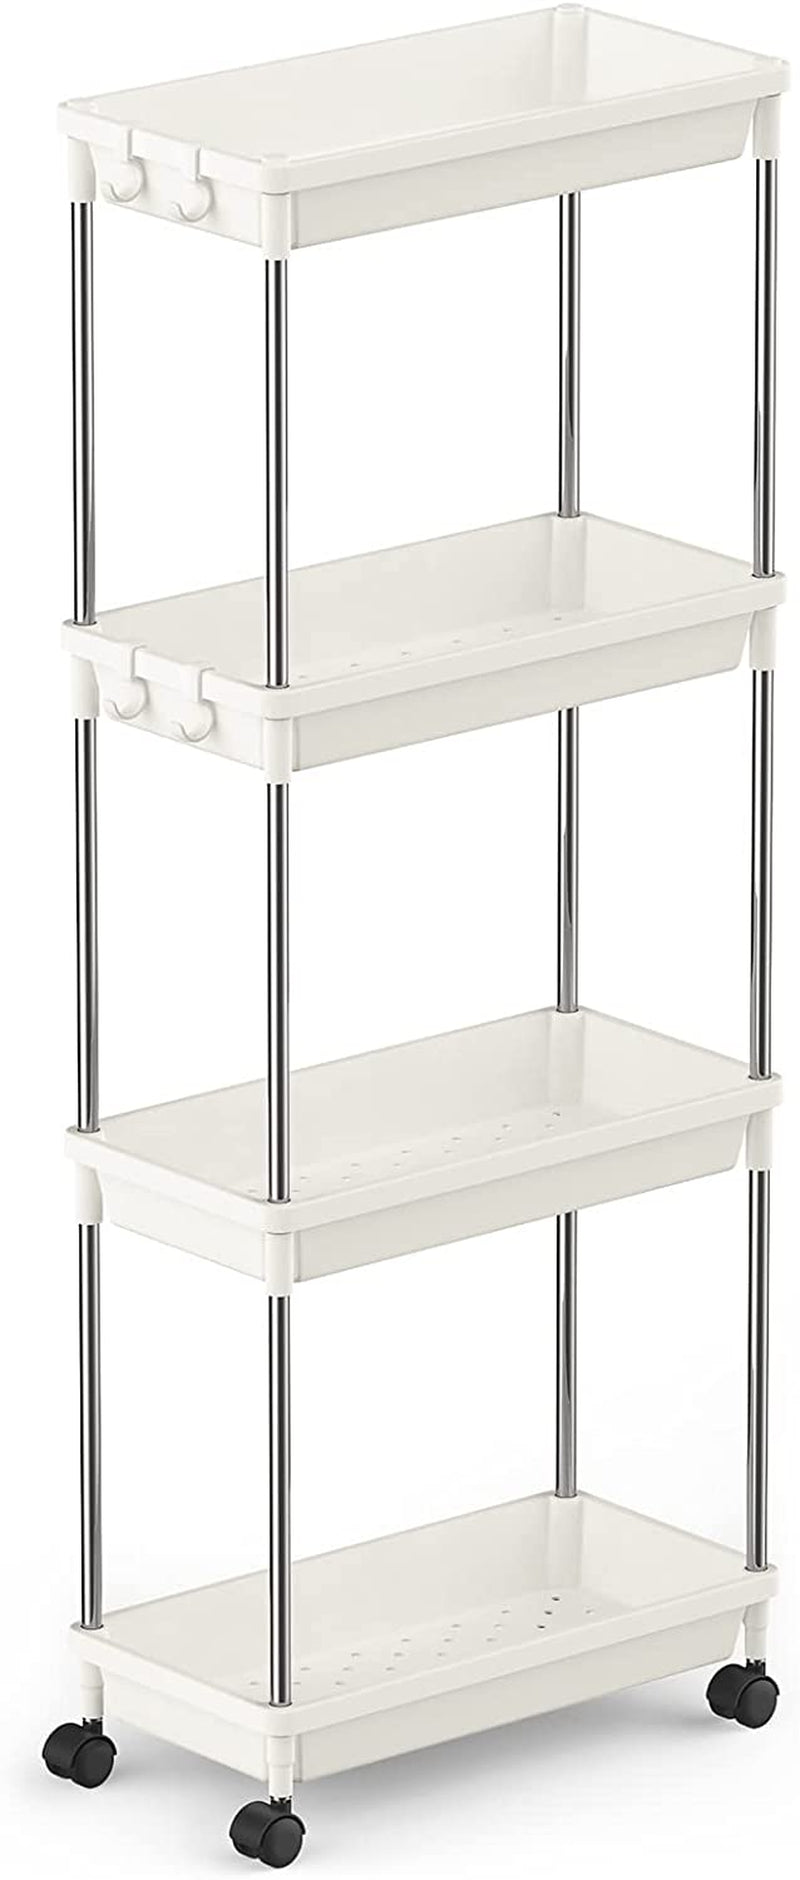 Lifewit Slim Storage Rolling Cart for Gap Narrow Space, 4 Tier Slide-Out Trolley Utility Rack Shelf Organizer with Wheels for Bathroom Kitchen Laundryroom Bedroom, Space-Saving Easy Assembly, White Home & Garden > Household Supplies > Storage & Organization Lifewit White 15.4" x 7.9" x 39.3" 